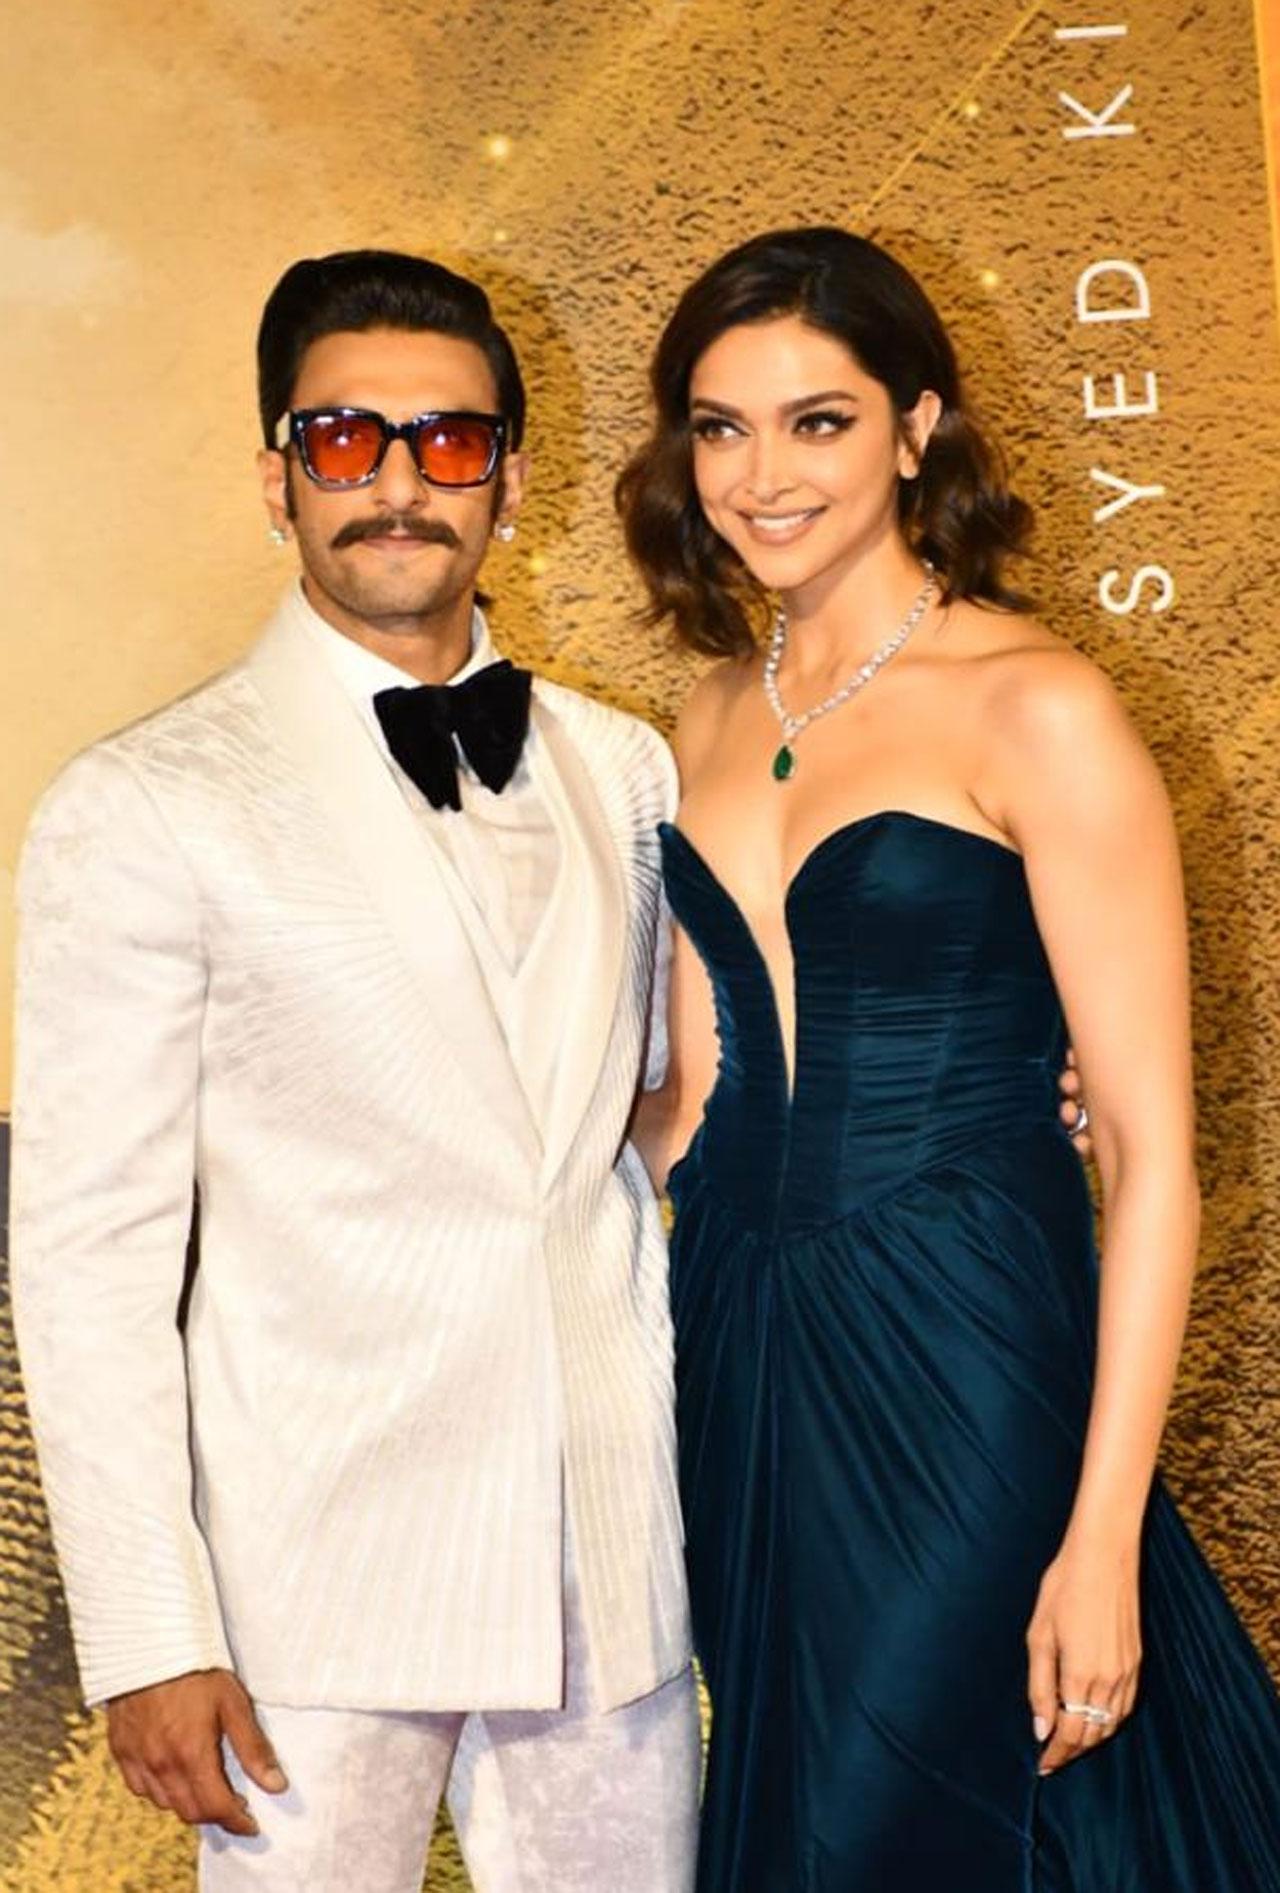 Is it Romi Bhatia or Deepika Padukone? Anyway, she looked radiant and ravishing in her outfit as she posed with husband Ranveer Singh. 83 marks their fourth collaboration together. The actress is also a co-producer on the mammoth project.